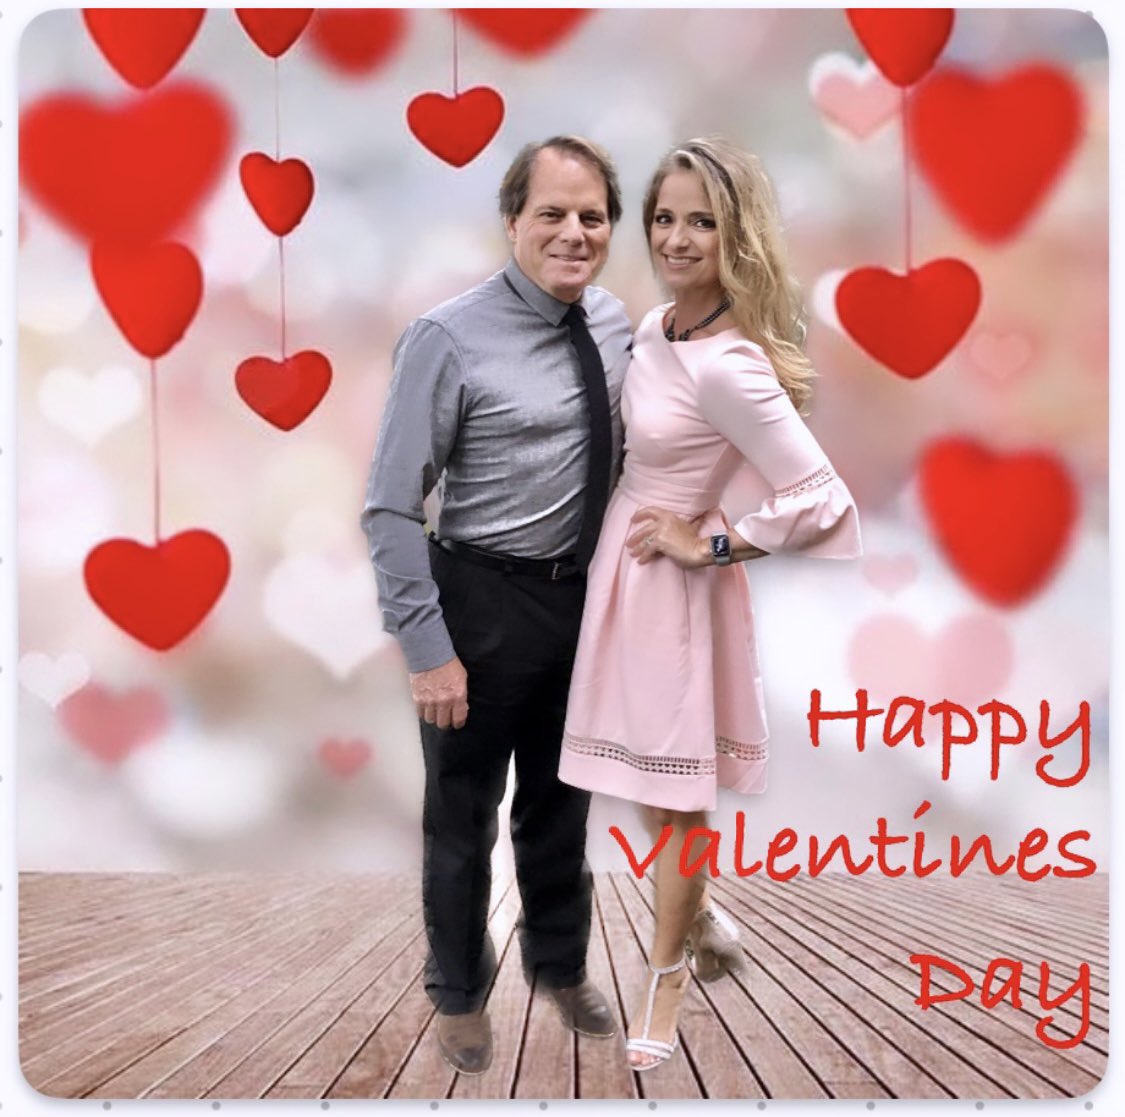 #valentinesday hope you had a #sweetday #loveforlife #myhusband